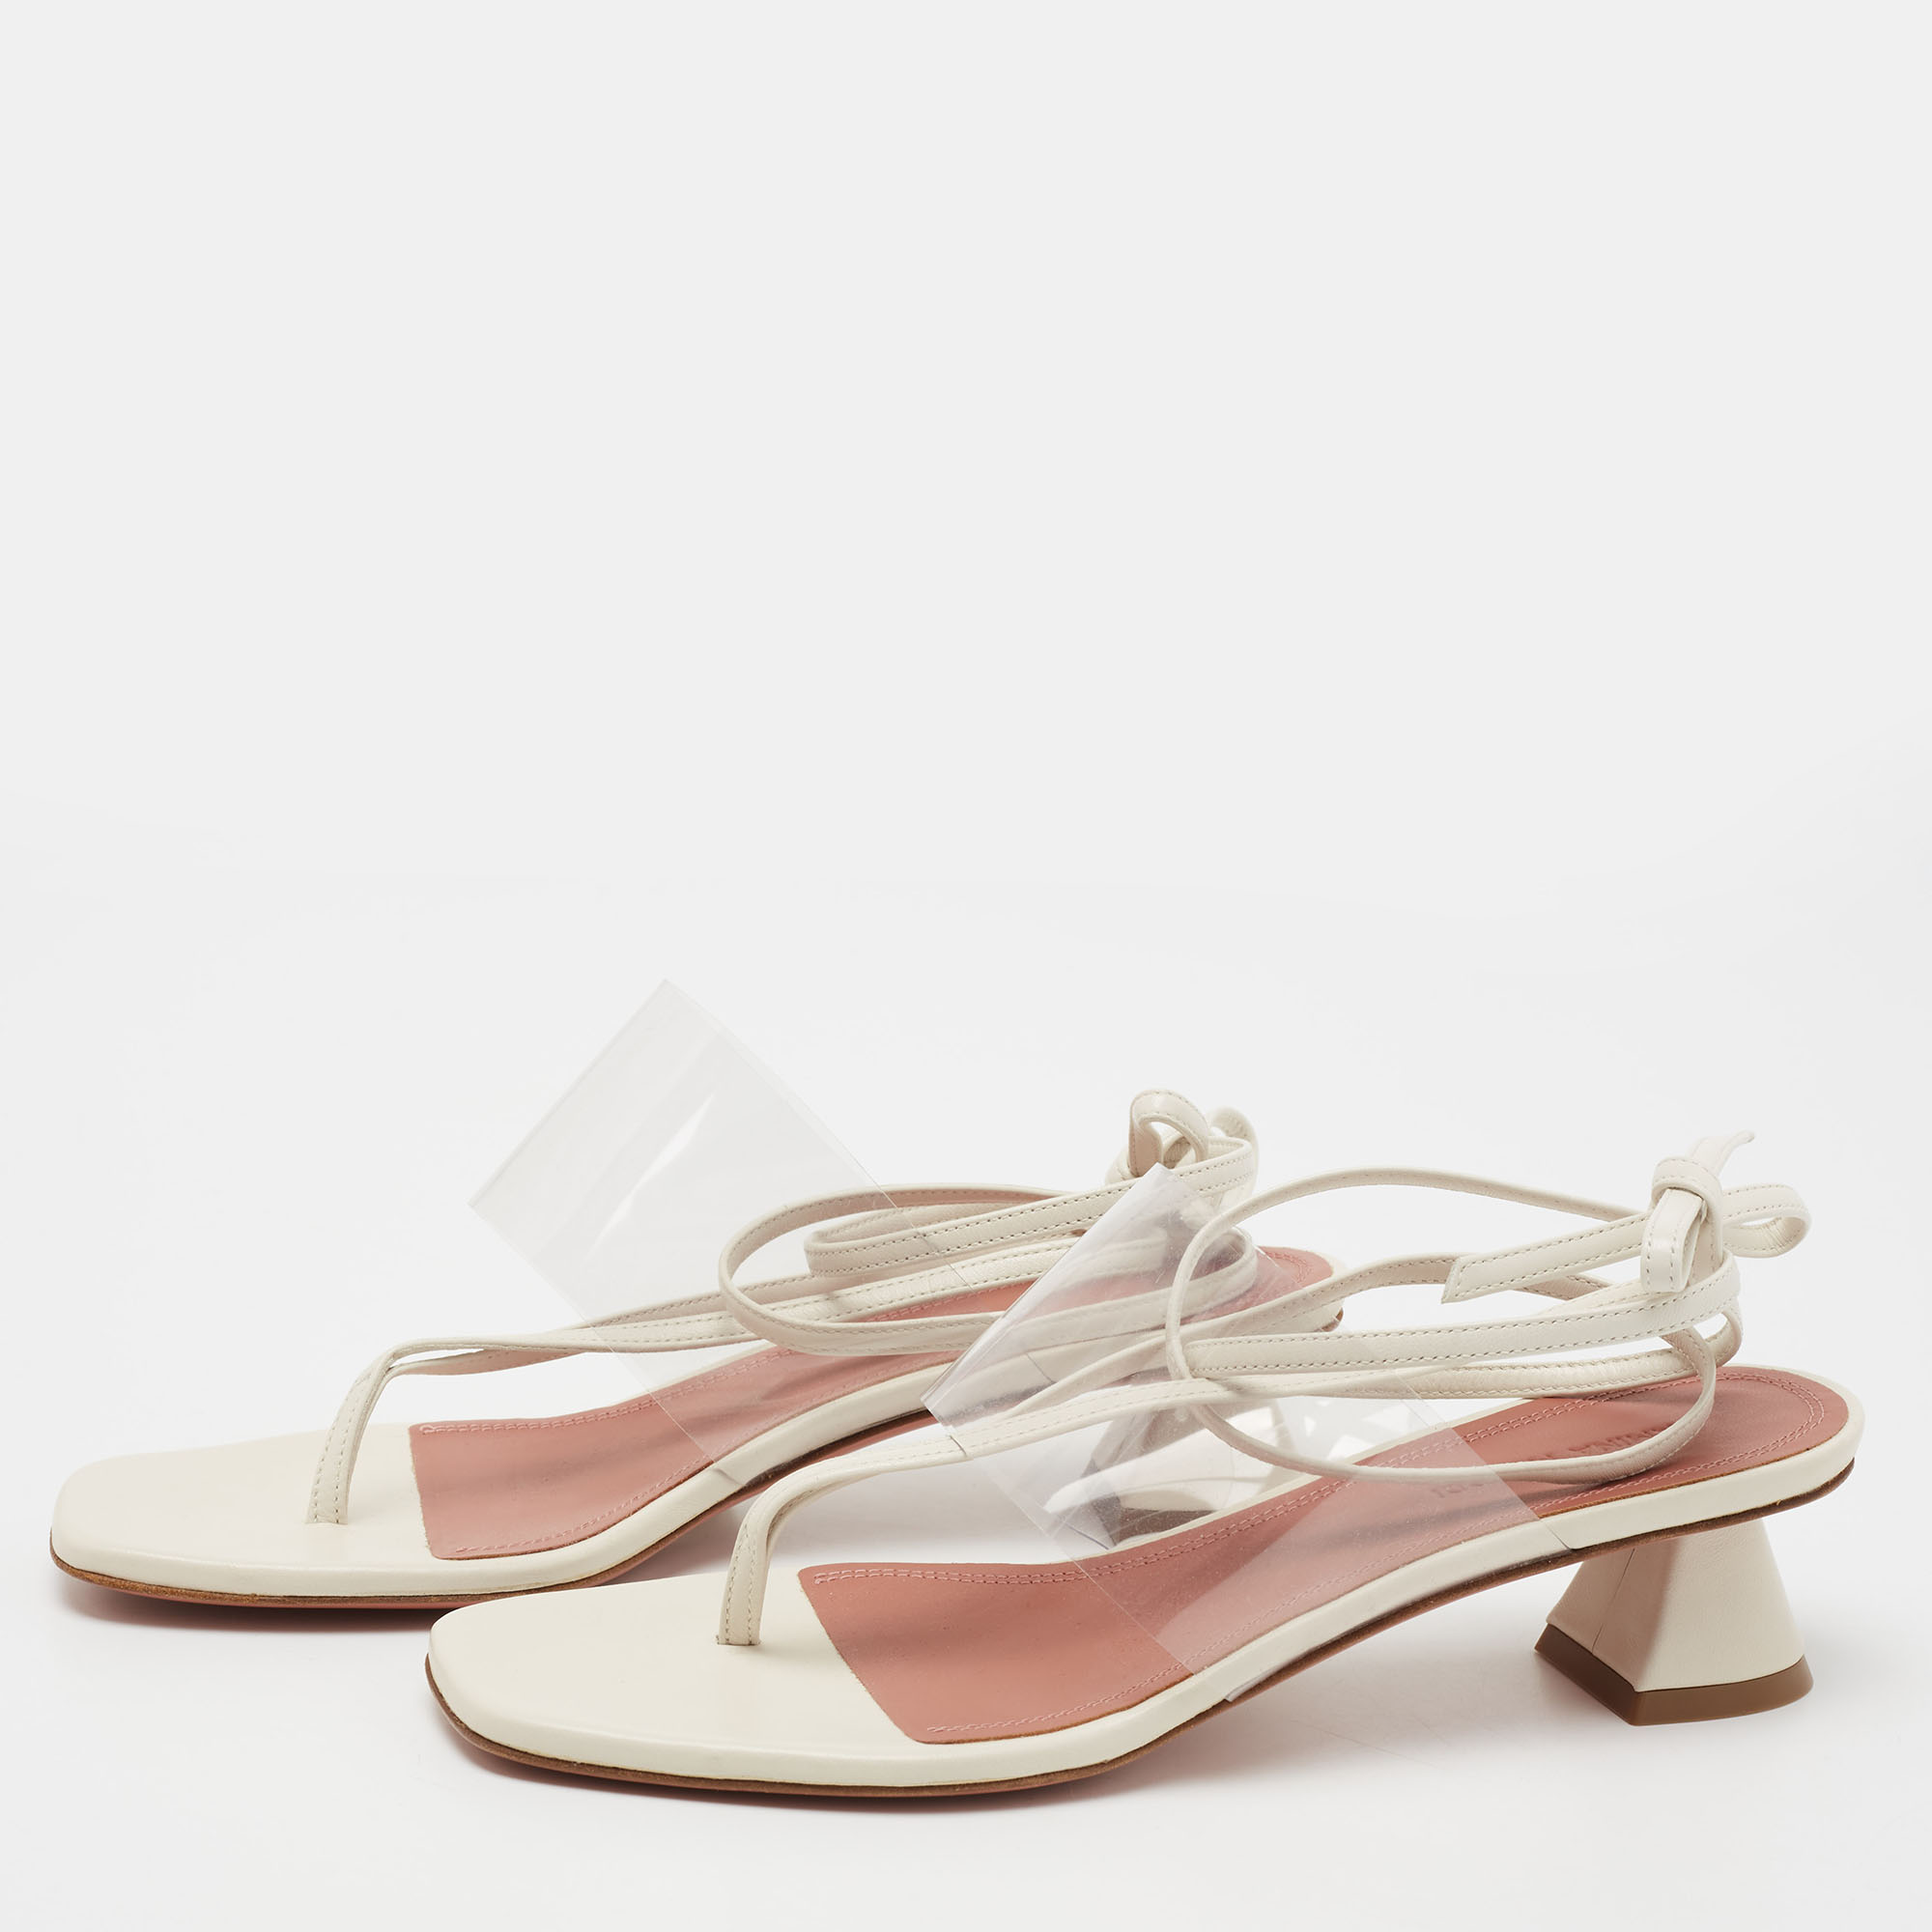 Amina Muaddi Cream Leather and PVC Zula Ankle Tie Sandals Size 37.5  - buy with discount